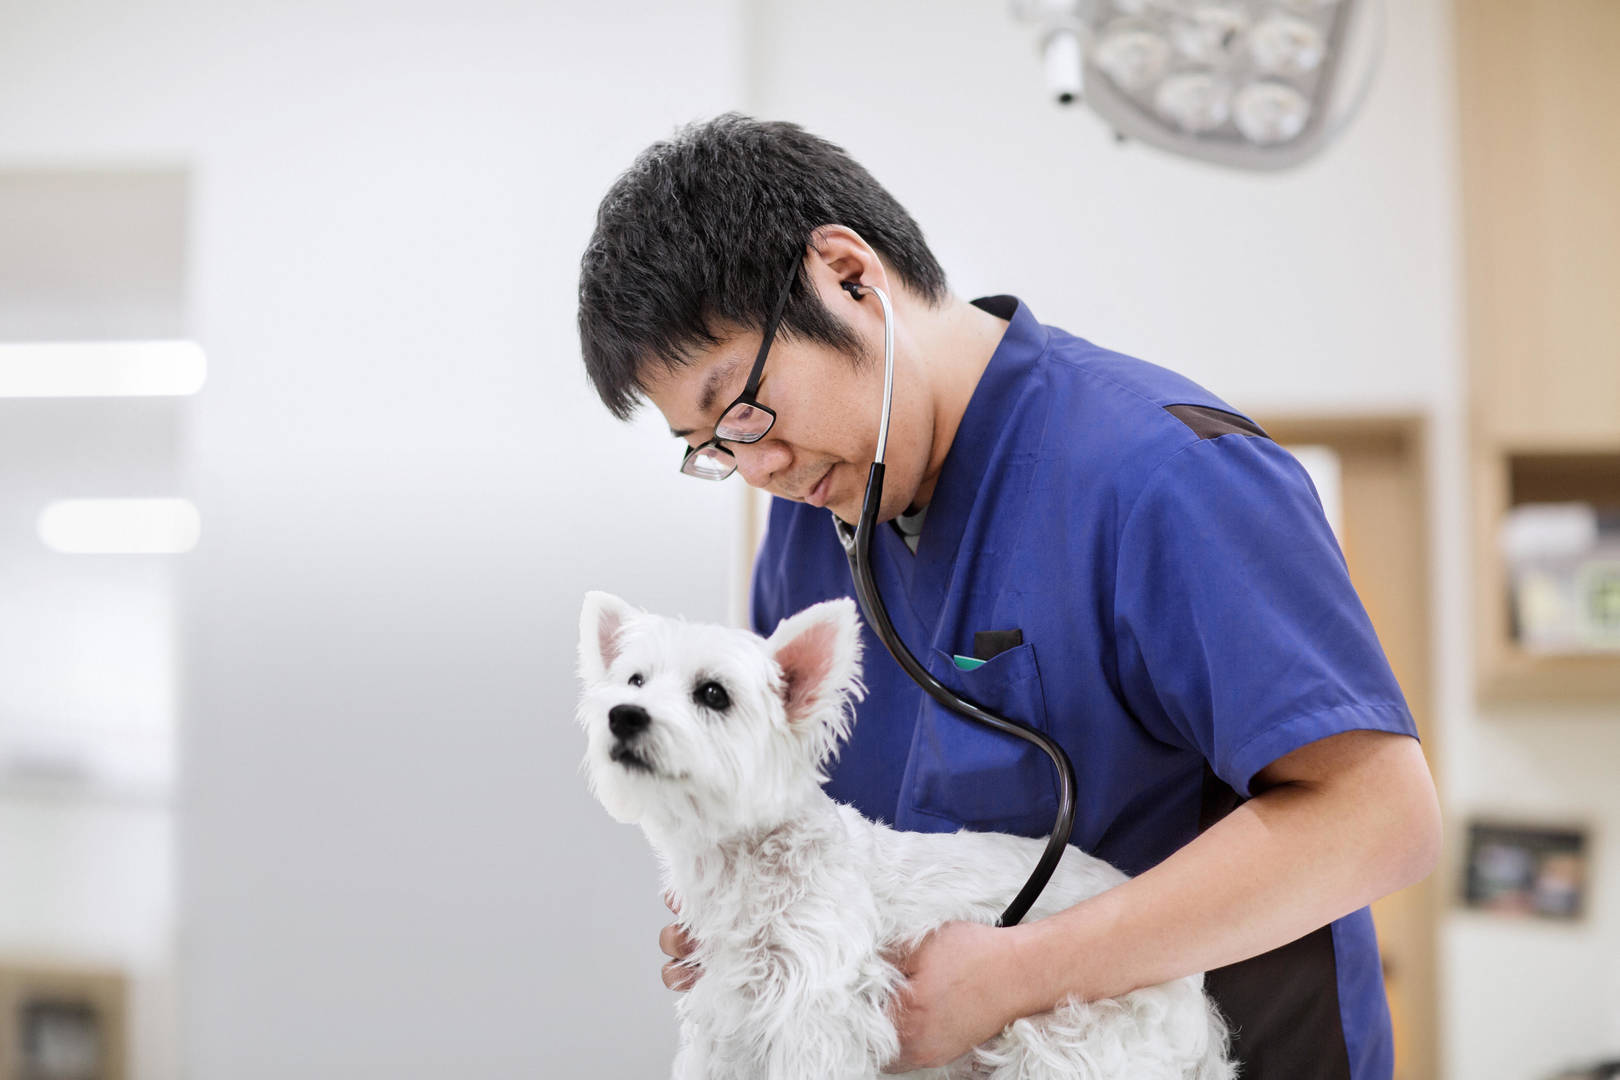 Asian American male veterinarian uses stethoscope on white dog